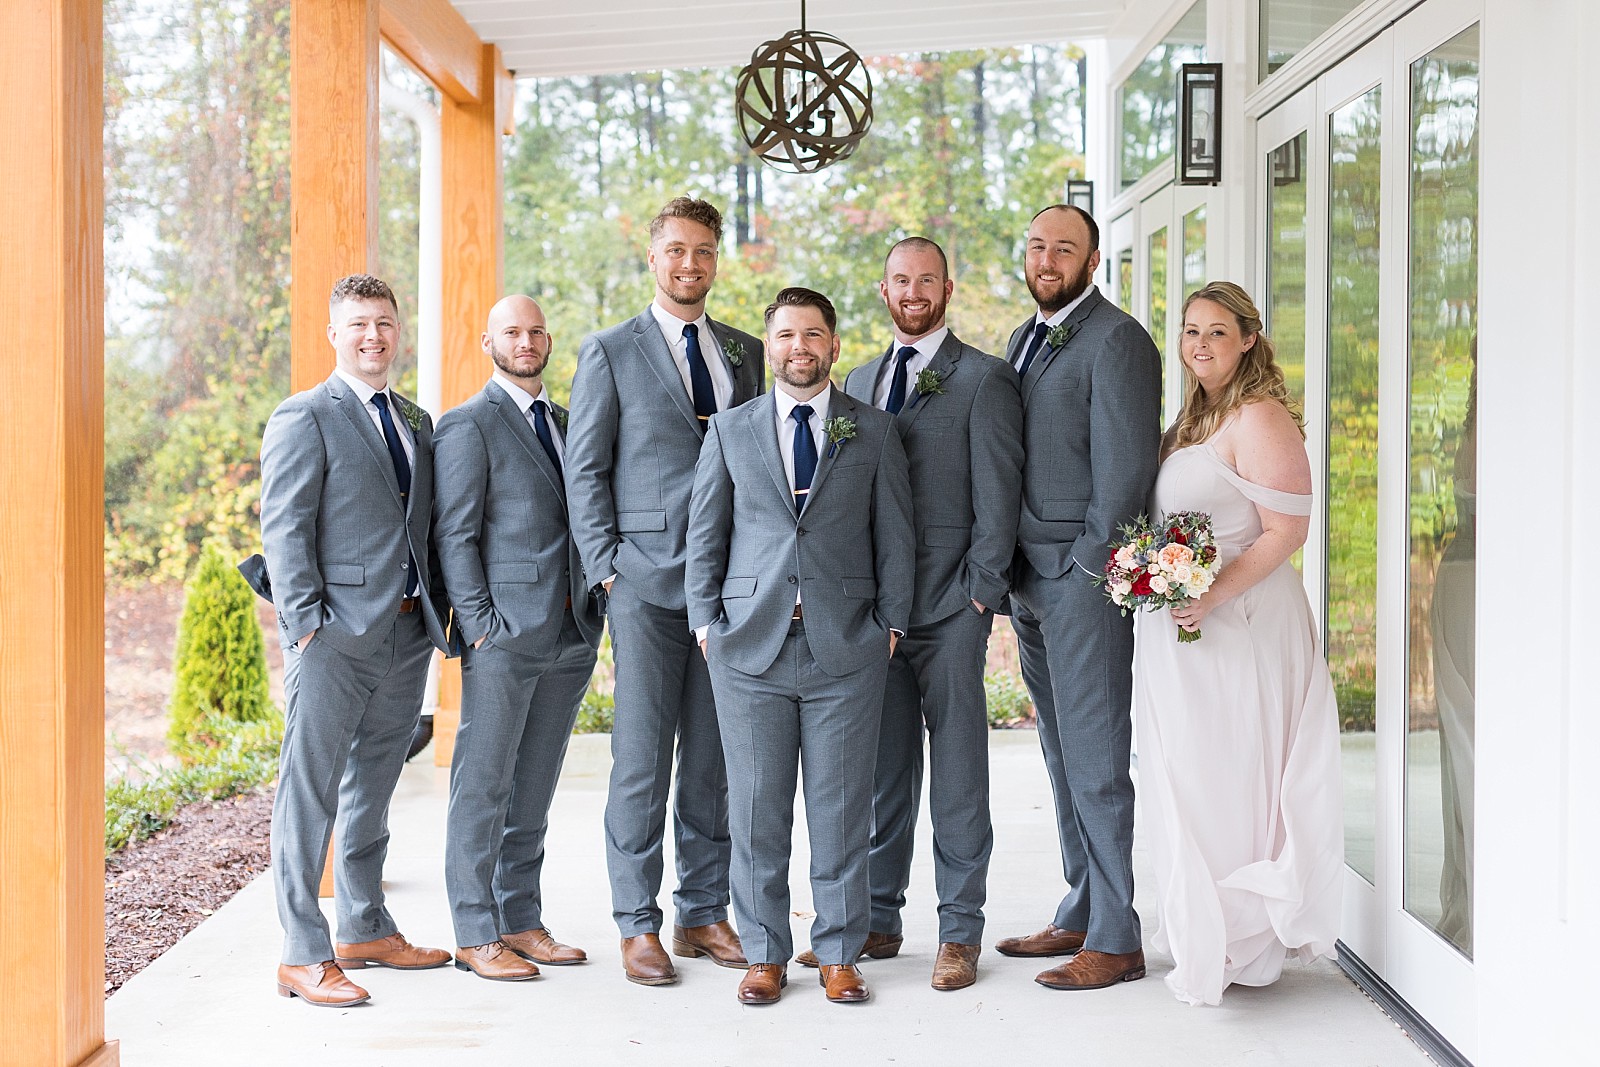 Groomsmen and woman outside The Upchurch in Cary NC | Raleigh NC Wedding Photography